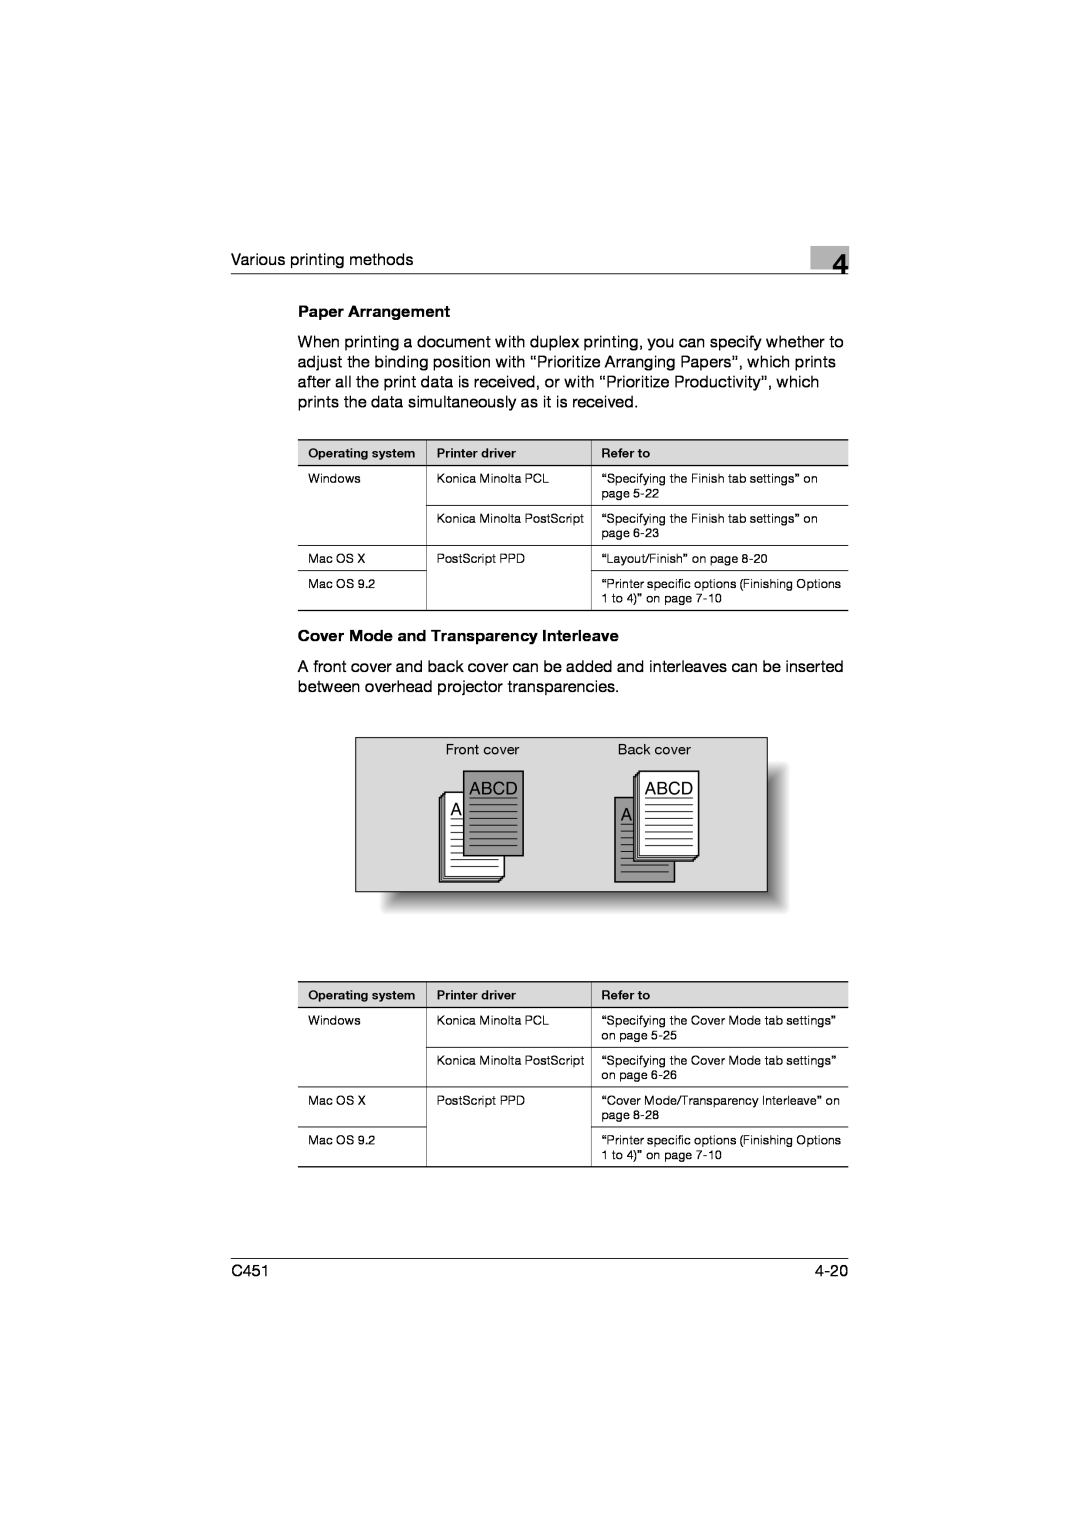 Konica Minolta C451 manual Abcd, Paper Arrangement, Cover Mode and Transparency Interleave 